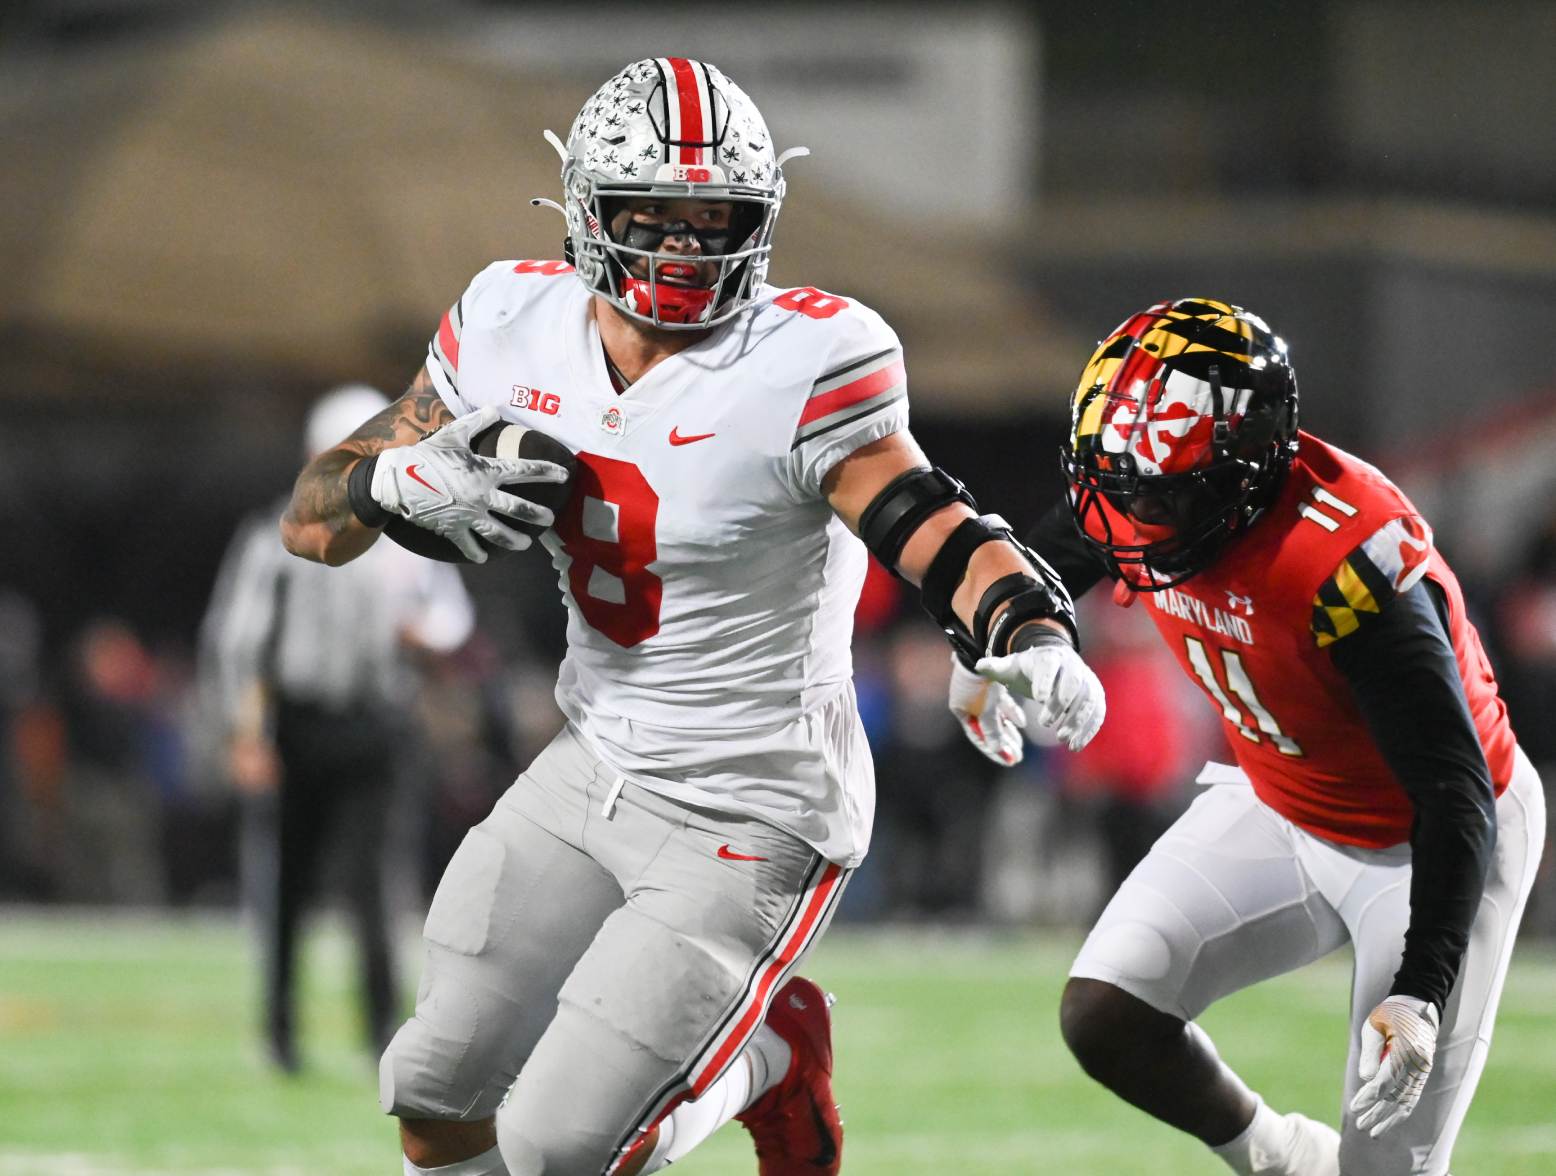 Nov 19, 2022; College Park, Maryland, USA; Ohio State Buckeyes tight end Cade Stover (8) runs after the catch as Maryland Terrapins linebacker Ruben Hyppolite II (11) defends during there second half at SECU Stadium. Credit: Tommy Gilligan-USA TODAY Sports